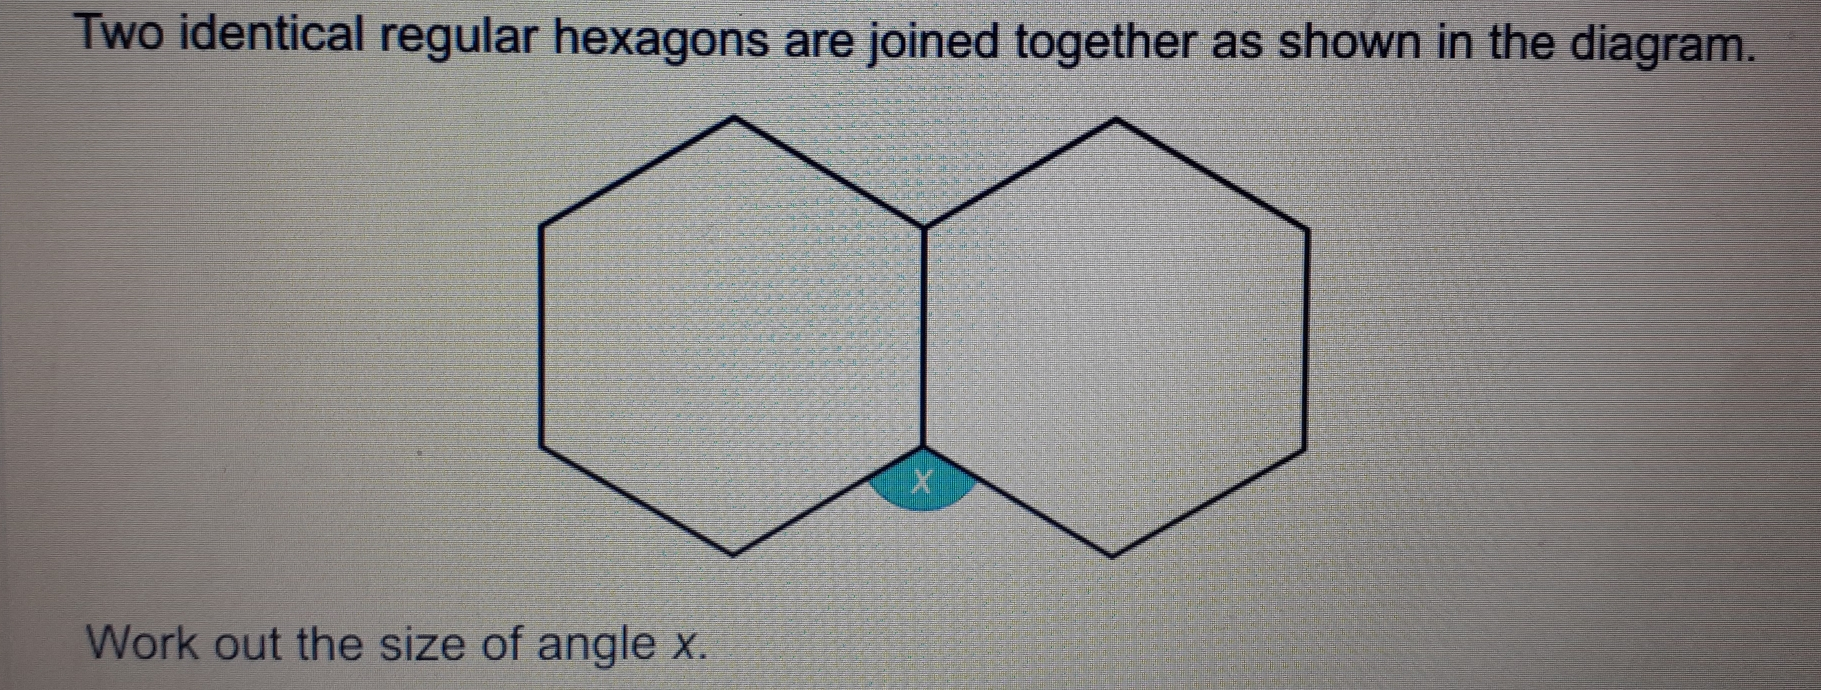 Two identical regular hexagons are joined together as shown in the diagram. Work out the size of angle x.